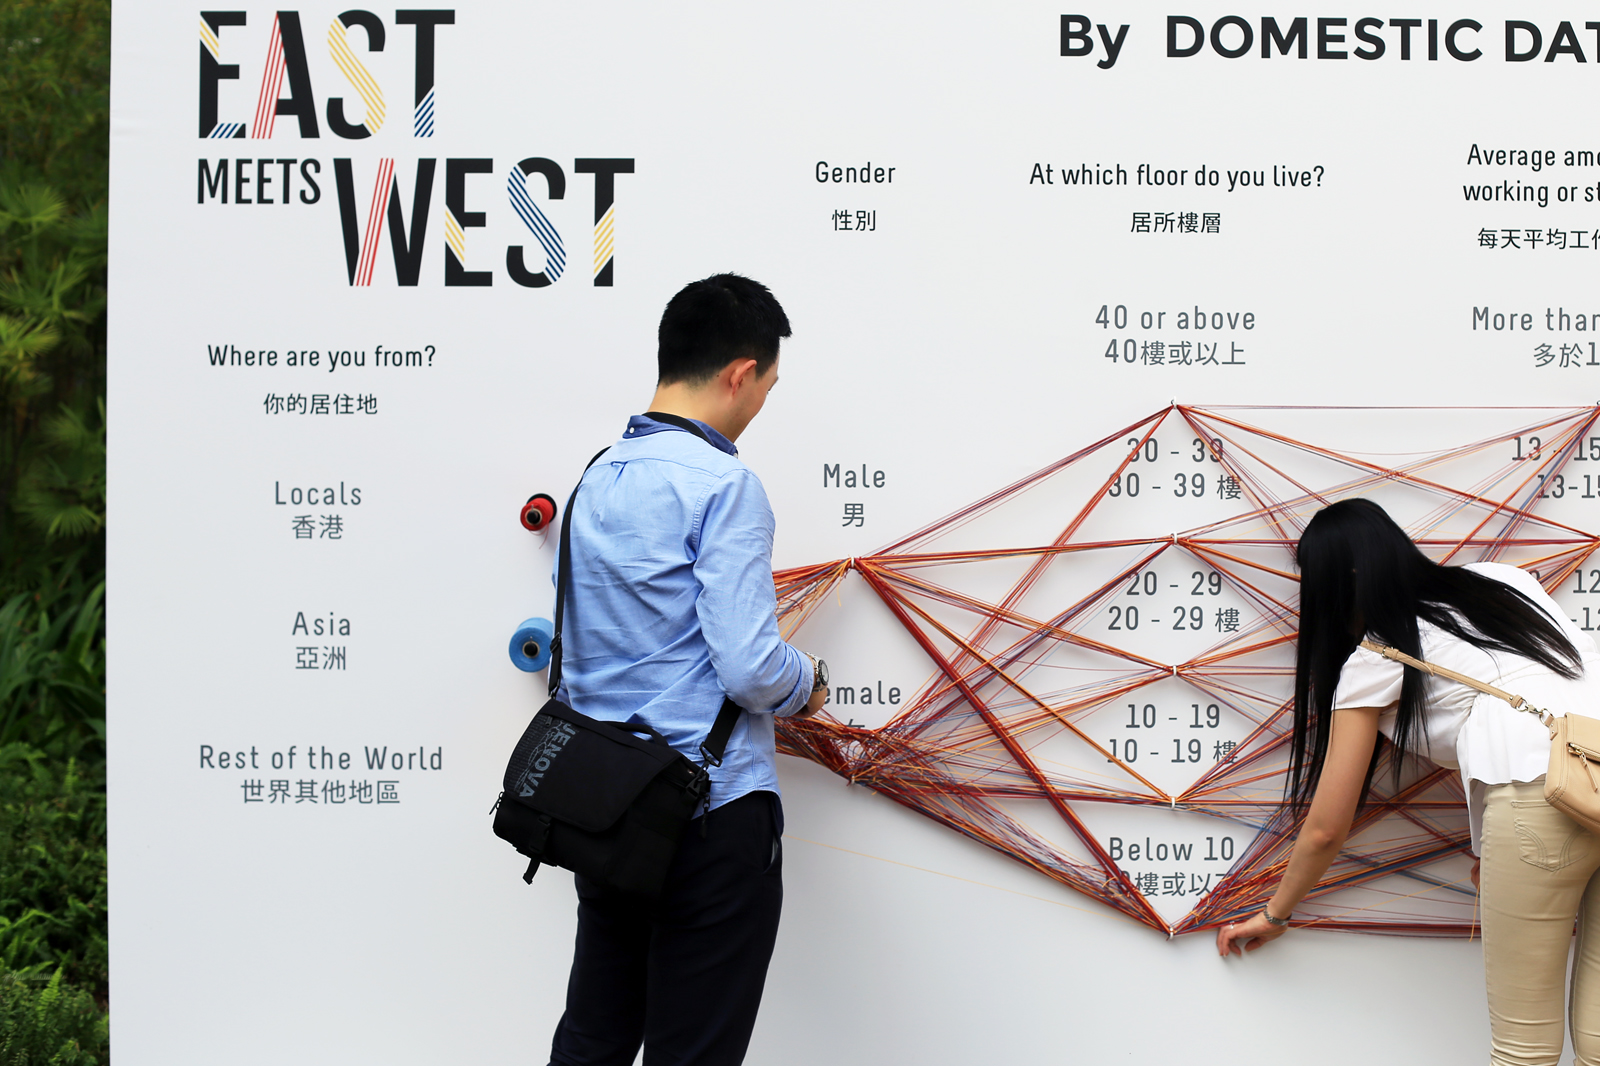 A couple interacting with a Data Strings installation called East meets West